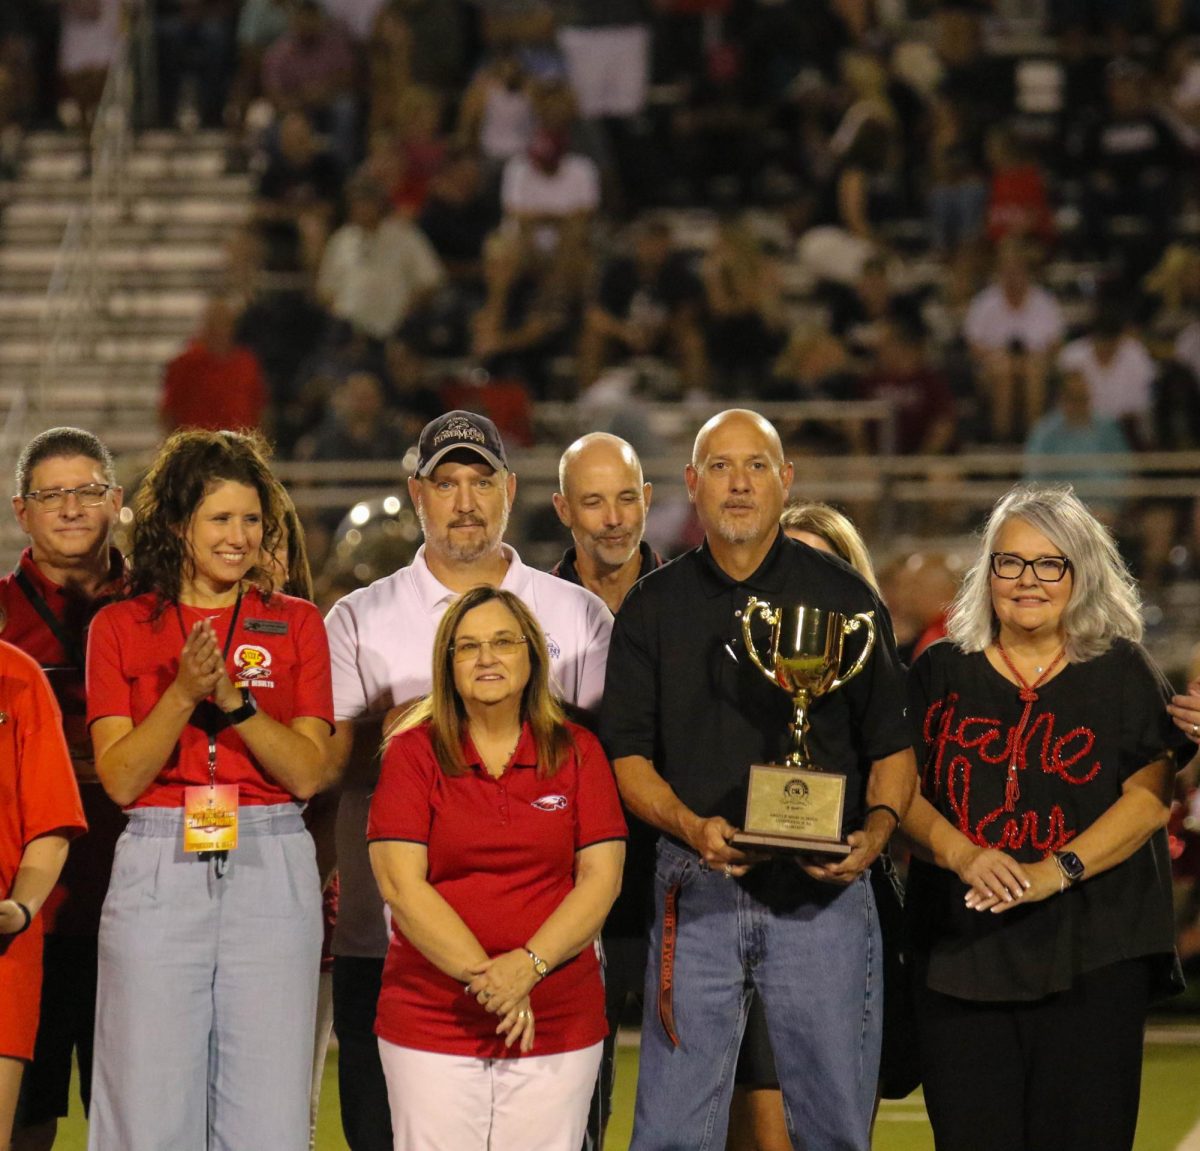 In order from left to right: Argyle Mayor Rick Bradford, Argyle ISD Superintendent Dr. Carpenter, former superintendent Dr. Wright, Board of Trustee Place 3 Sam Slaton, Board of Trustee Place 4 Ritchie Deffenbaugh, Argyle High School Principal John King, and Texas House Rep. Kronda Thimesch accept the UIL Lone Star Cup on Sep. 1, 2023 at Eagle Satdium.